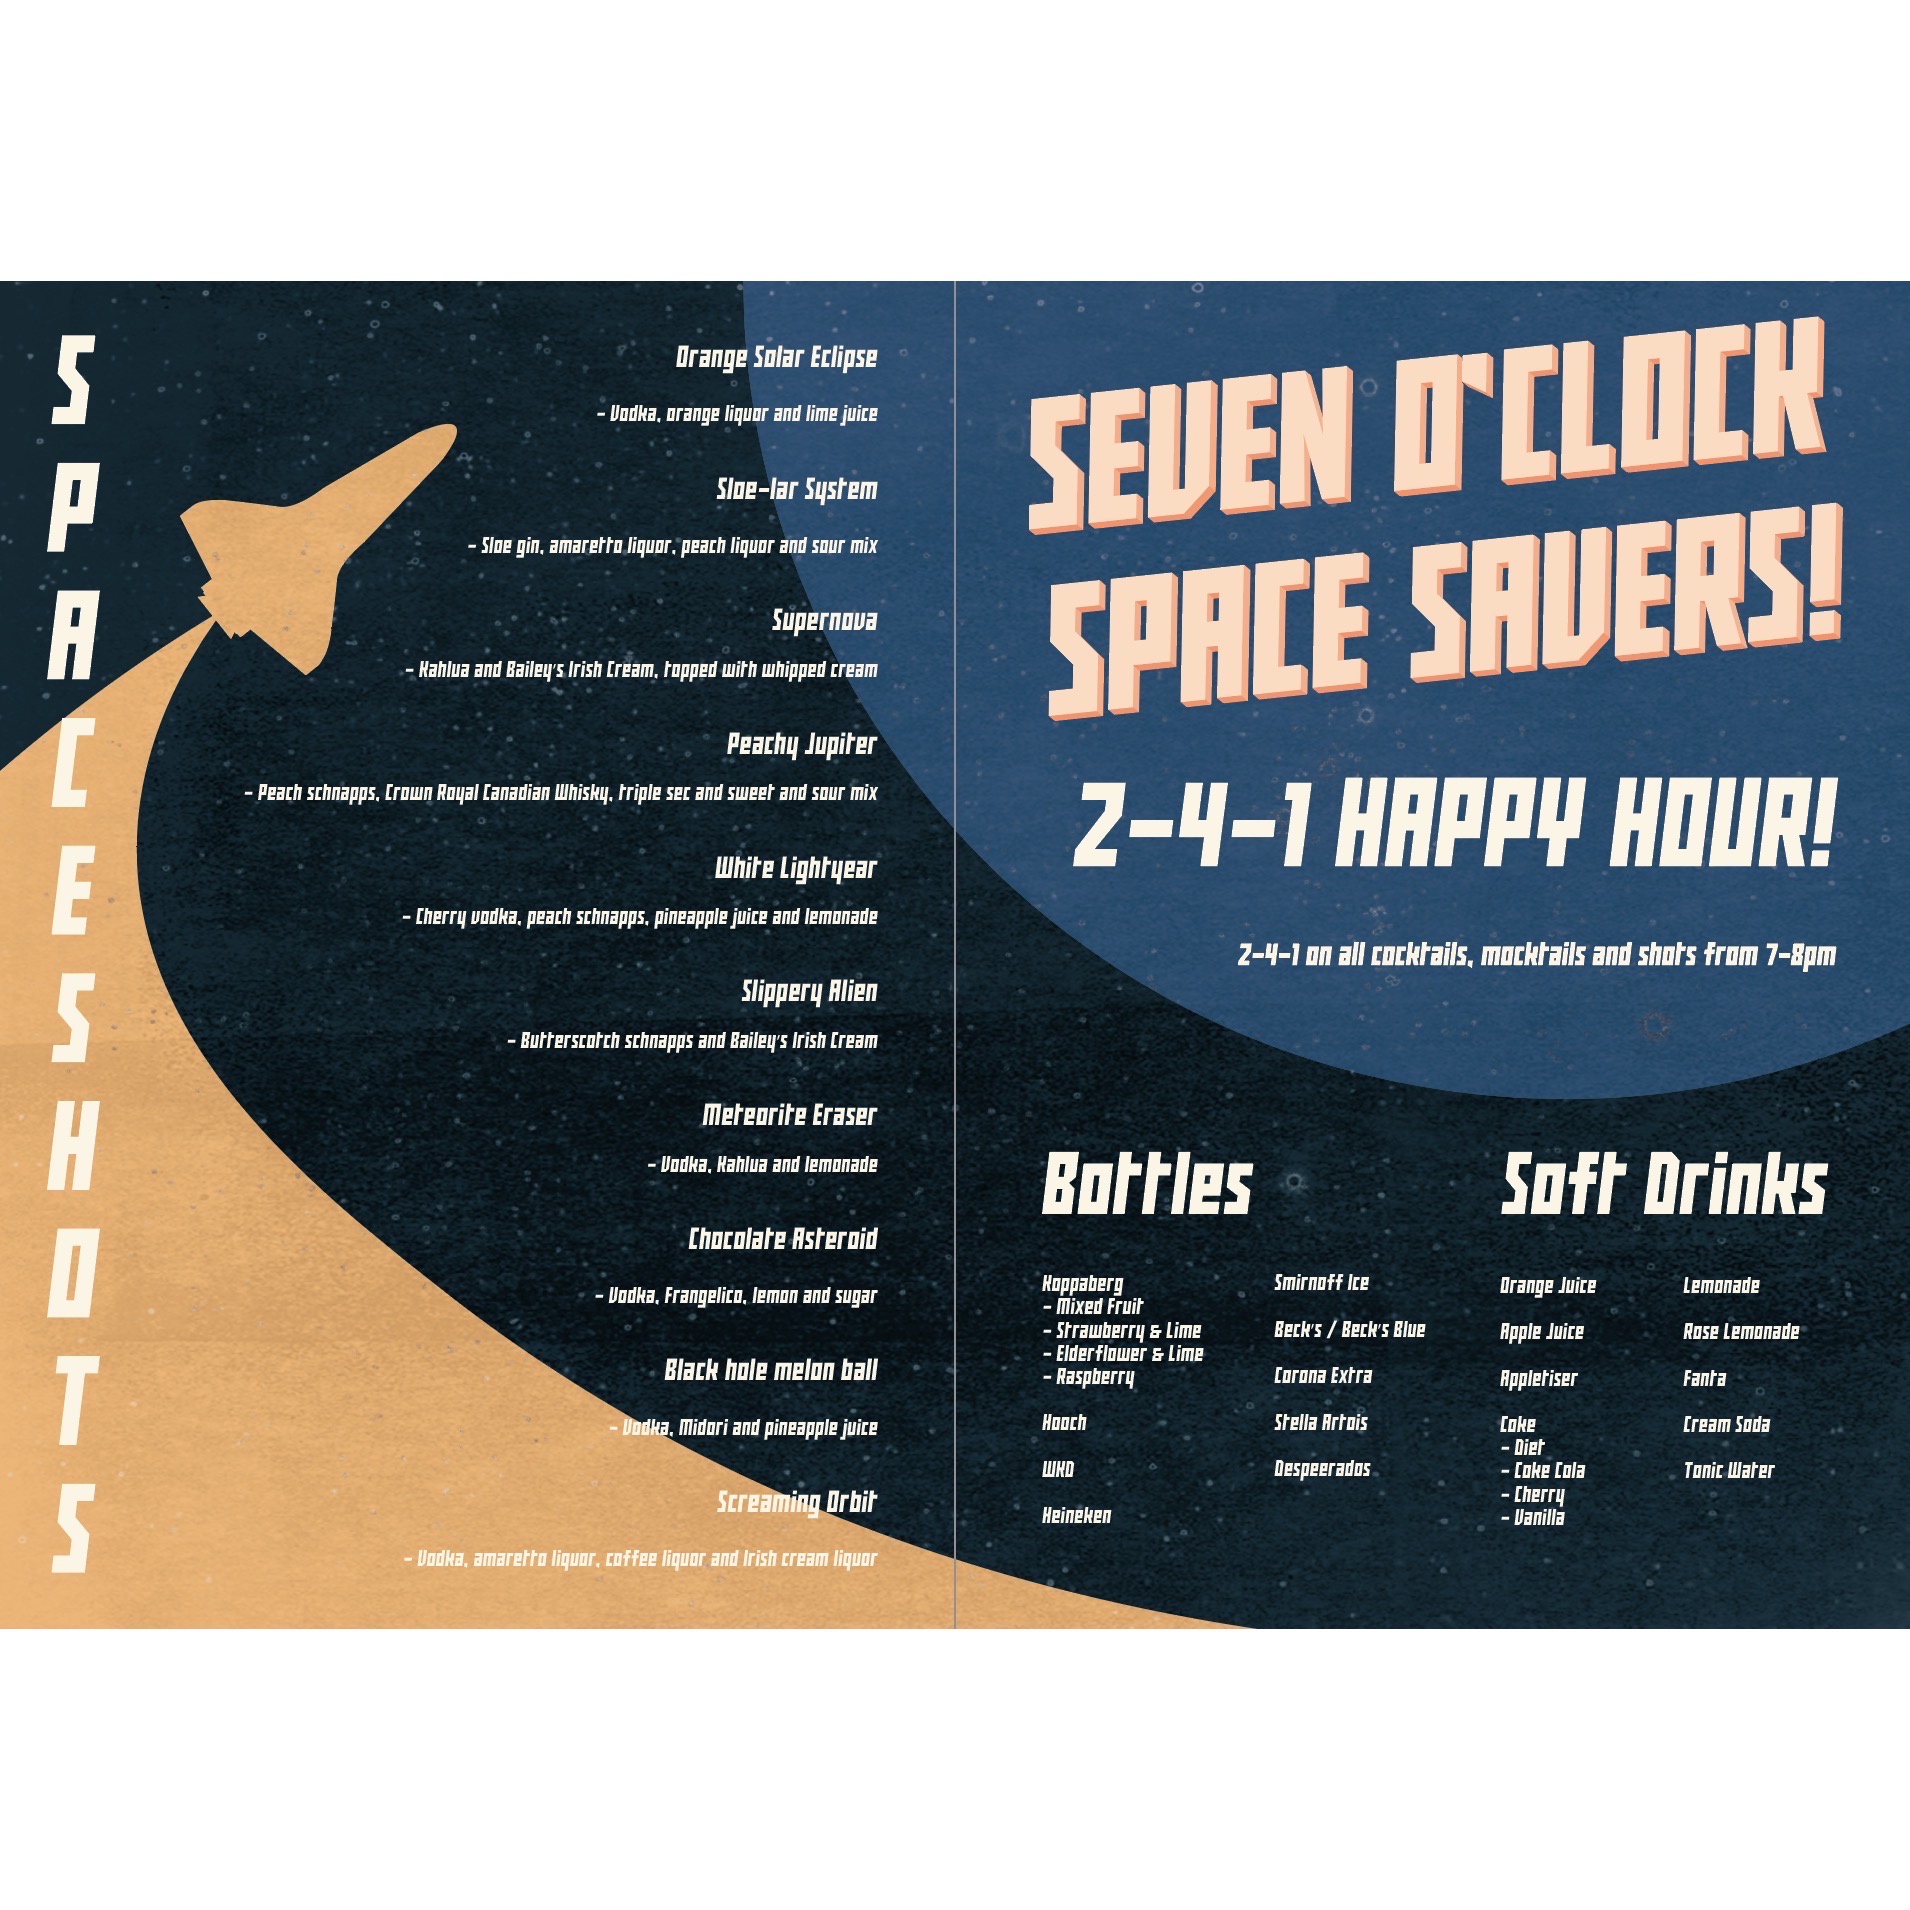 "Space themed menu - This is one of the double page spreads from a space themed menu. Each cocktail, mocktail and shot have space themed names. George Inwards."